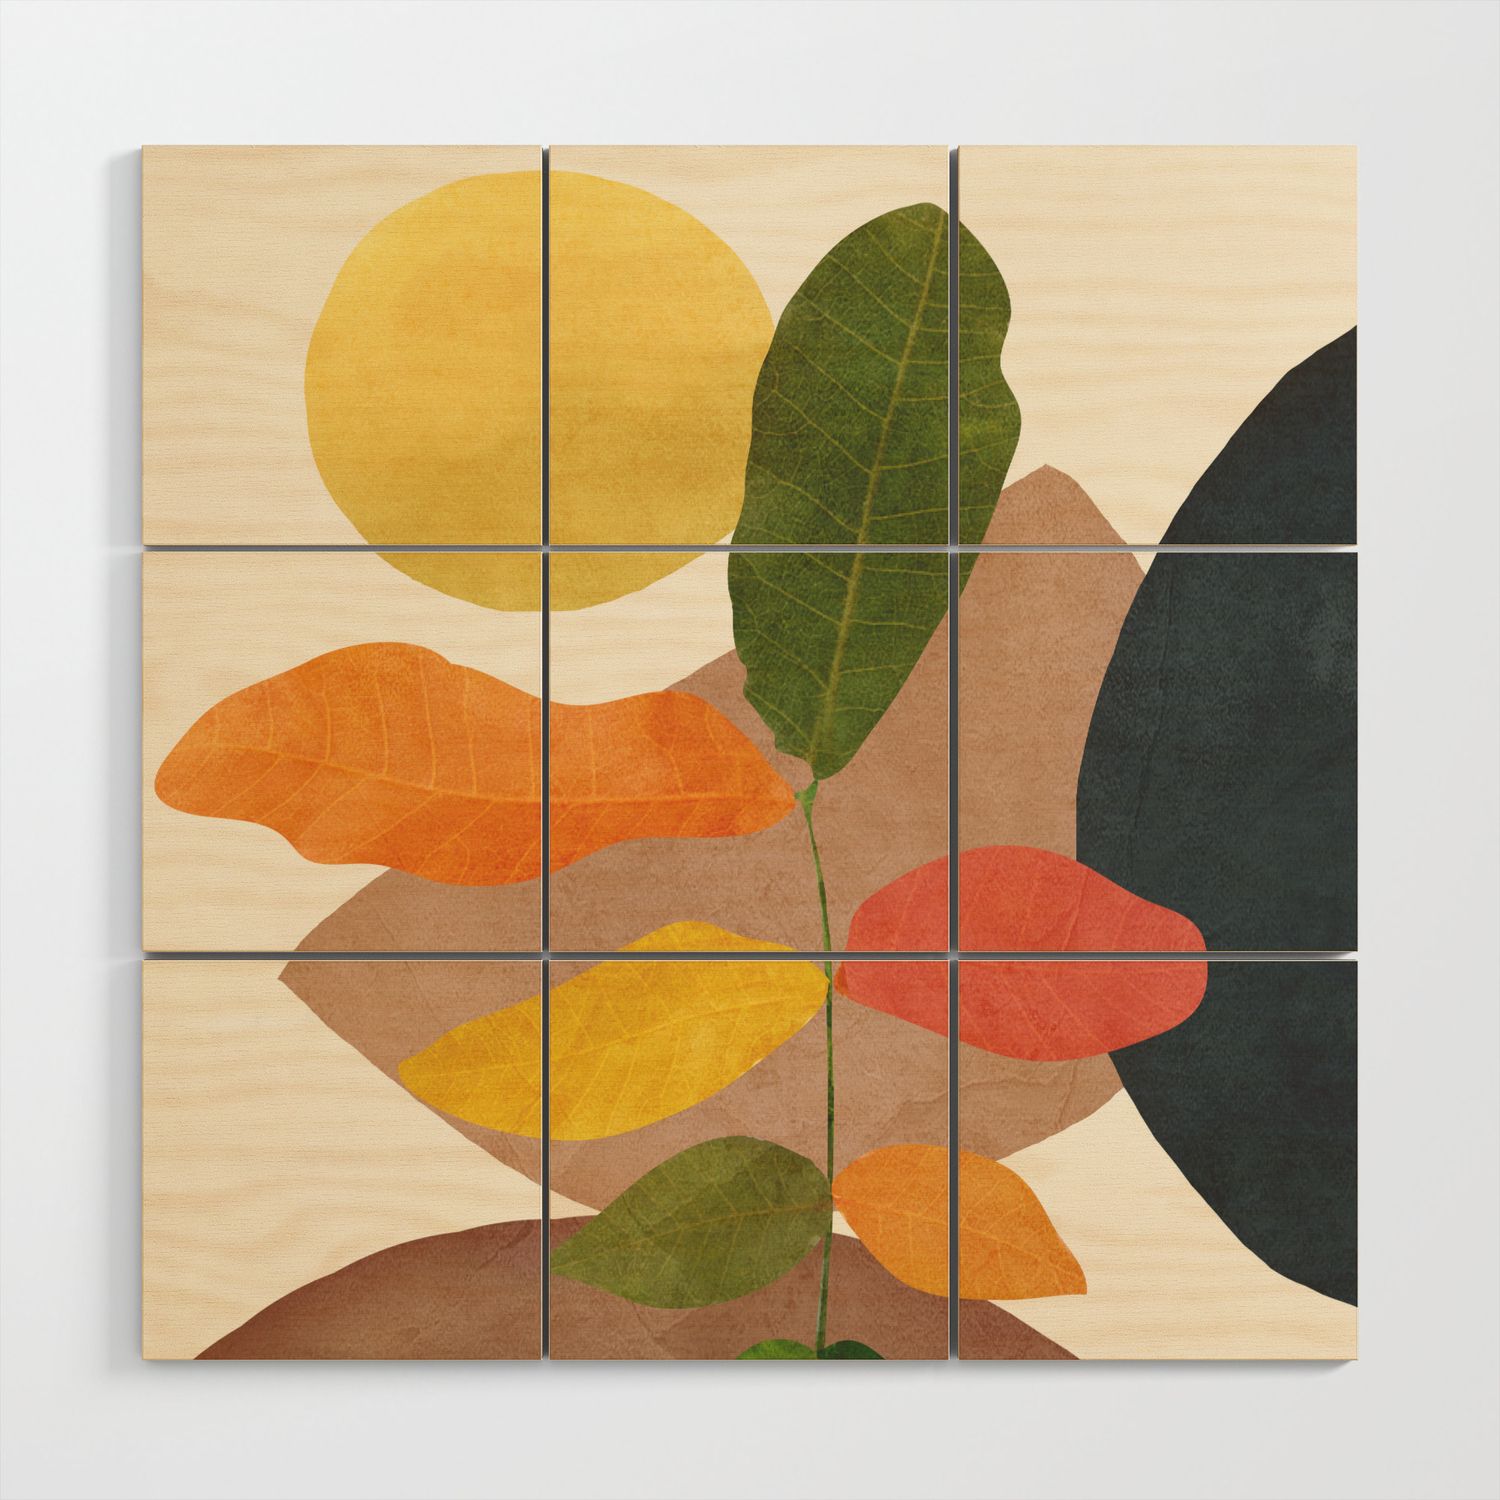 Colorful Branching Out 19 Wood Wall Artcity Art | Society6 Within Colorful Branching Wall Art (View 5 of 15)